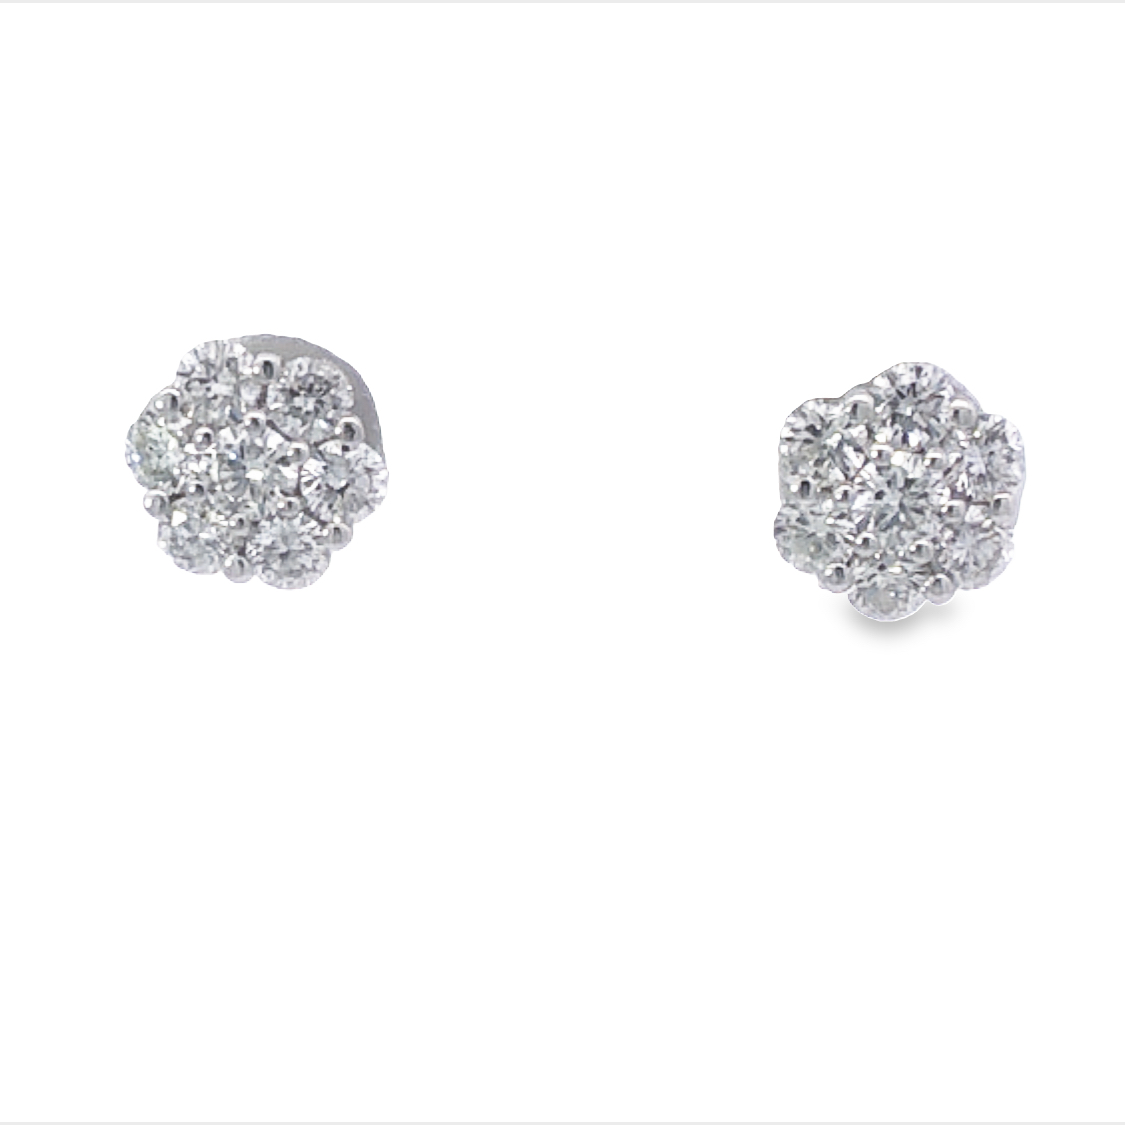 14K White Gold Stud Earrings with14 Round Diamonds 0.76 Tcw